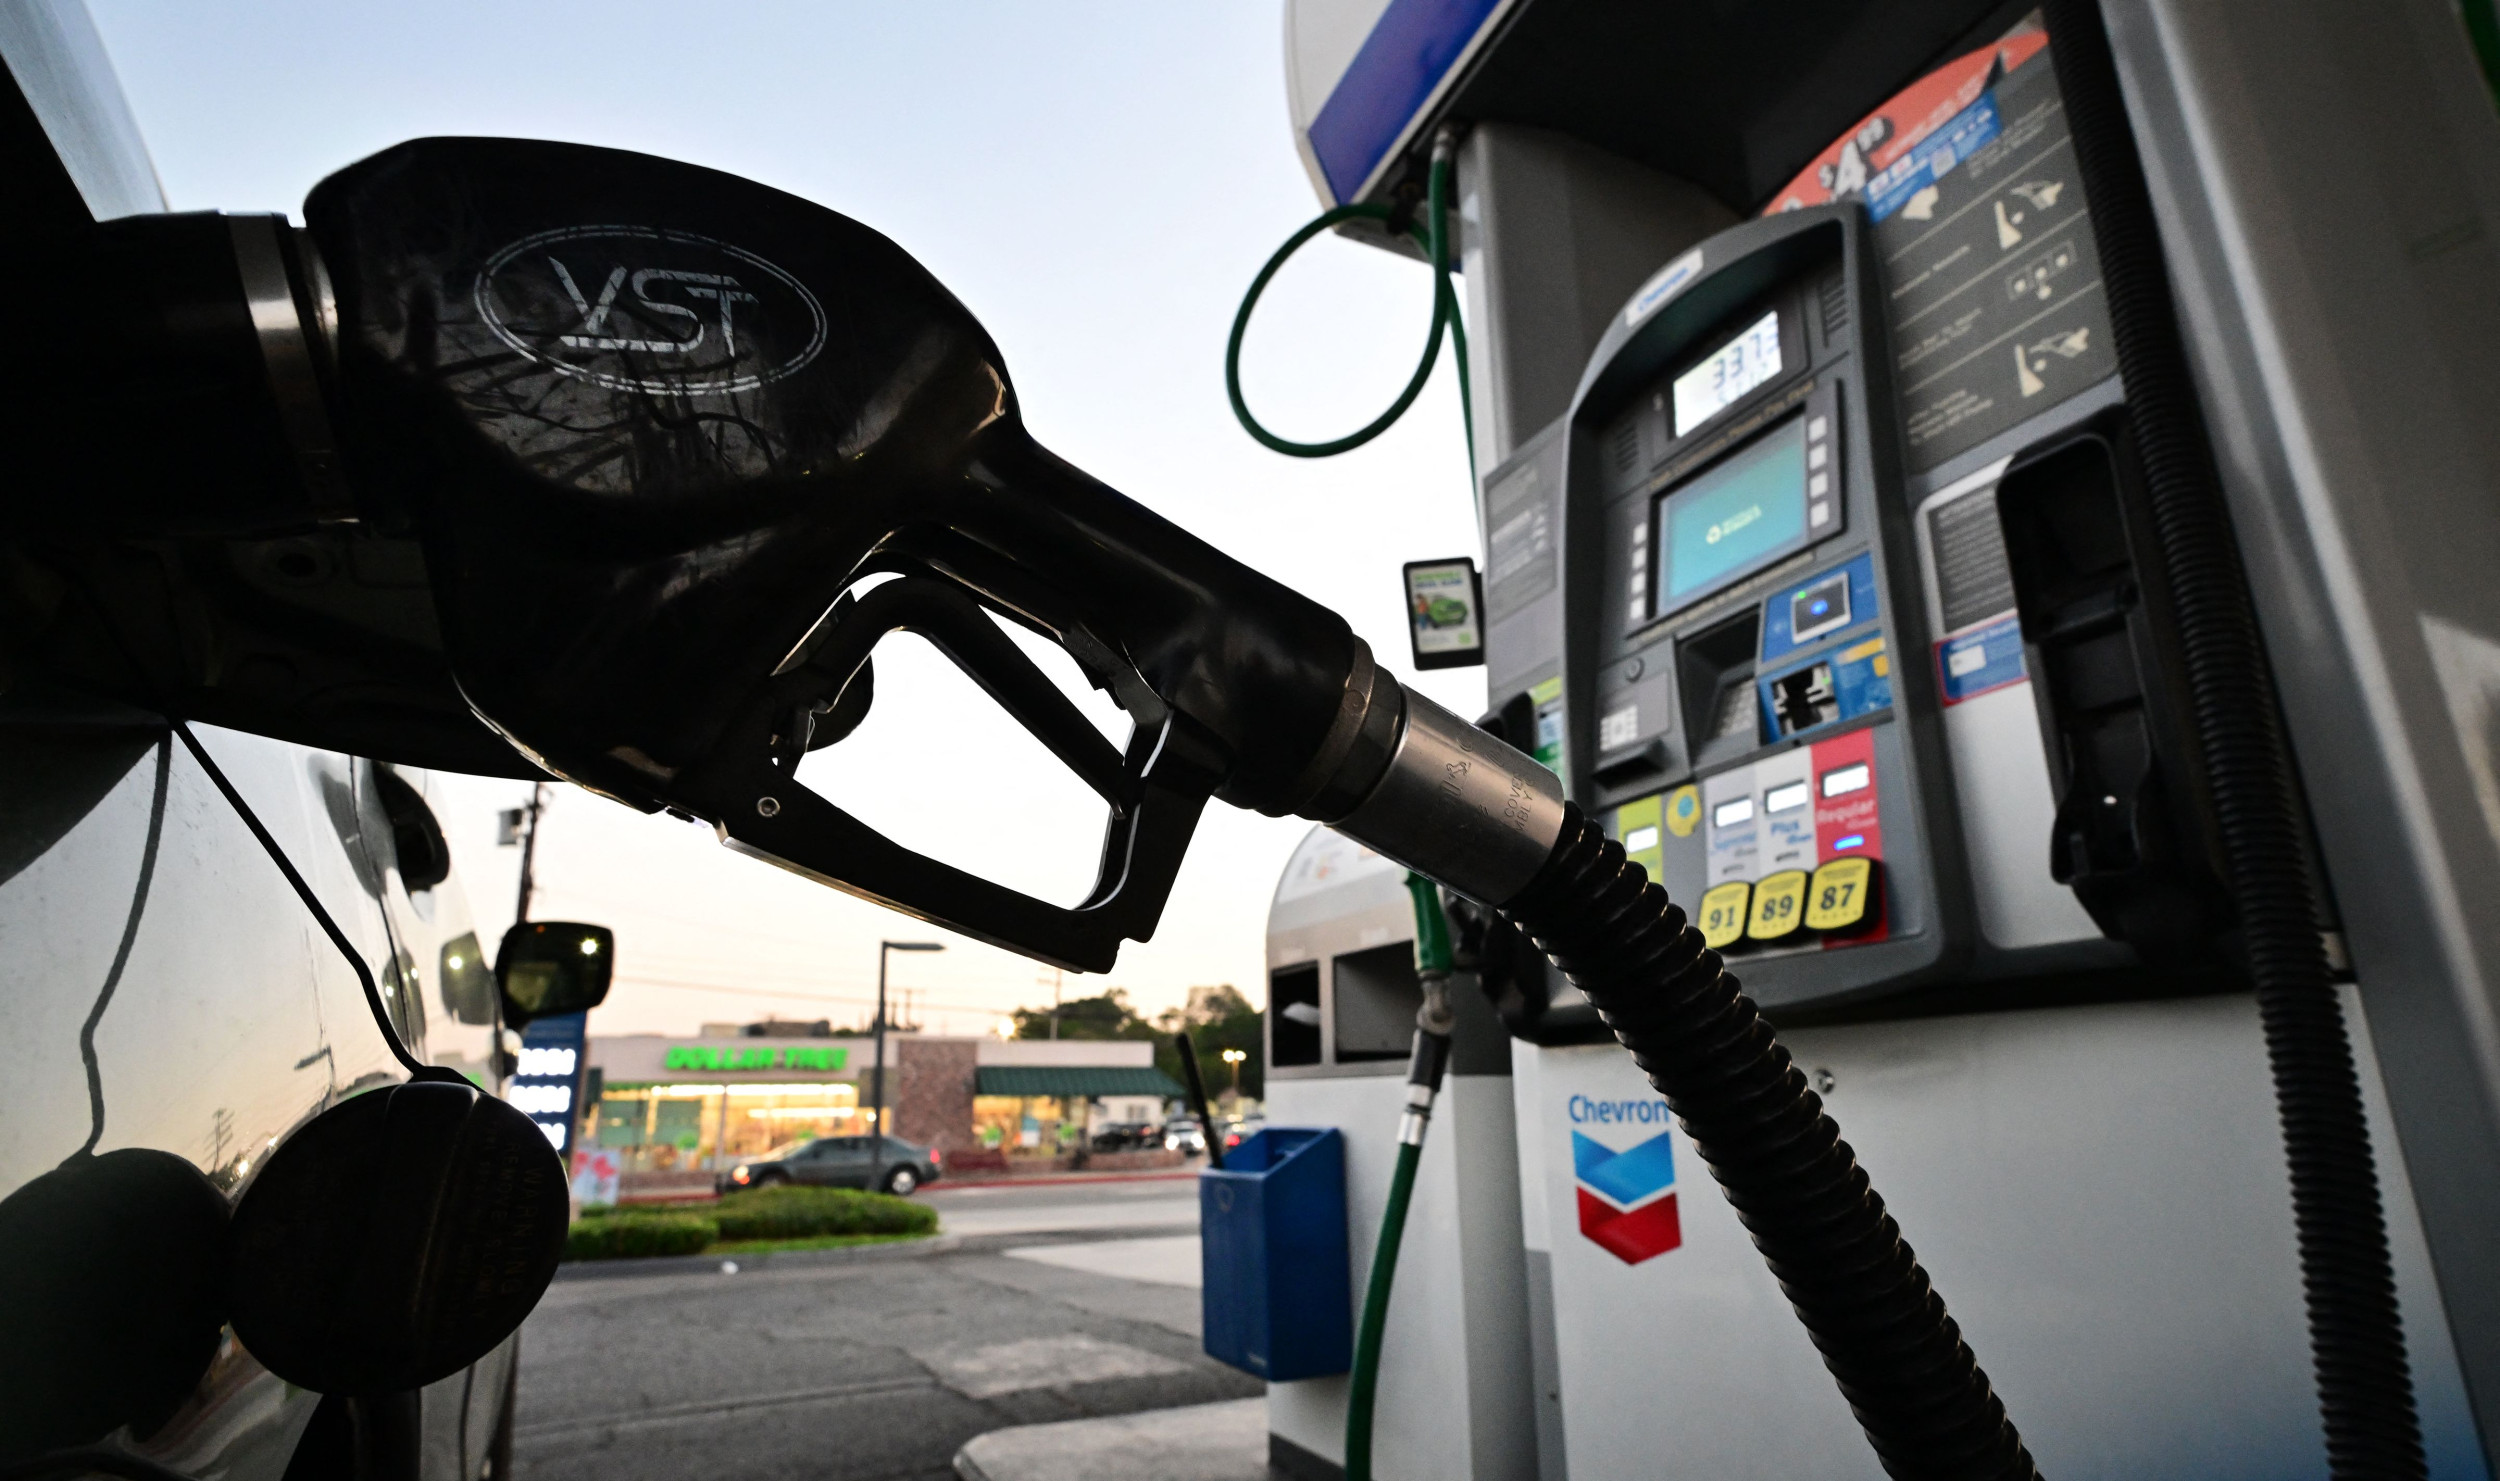 Gasoline prices falling to their lowest point gives hope to everyone that inflation will somehow slow down over the next few months. (Photo: Newsweek)